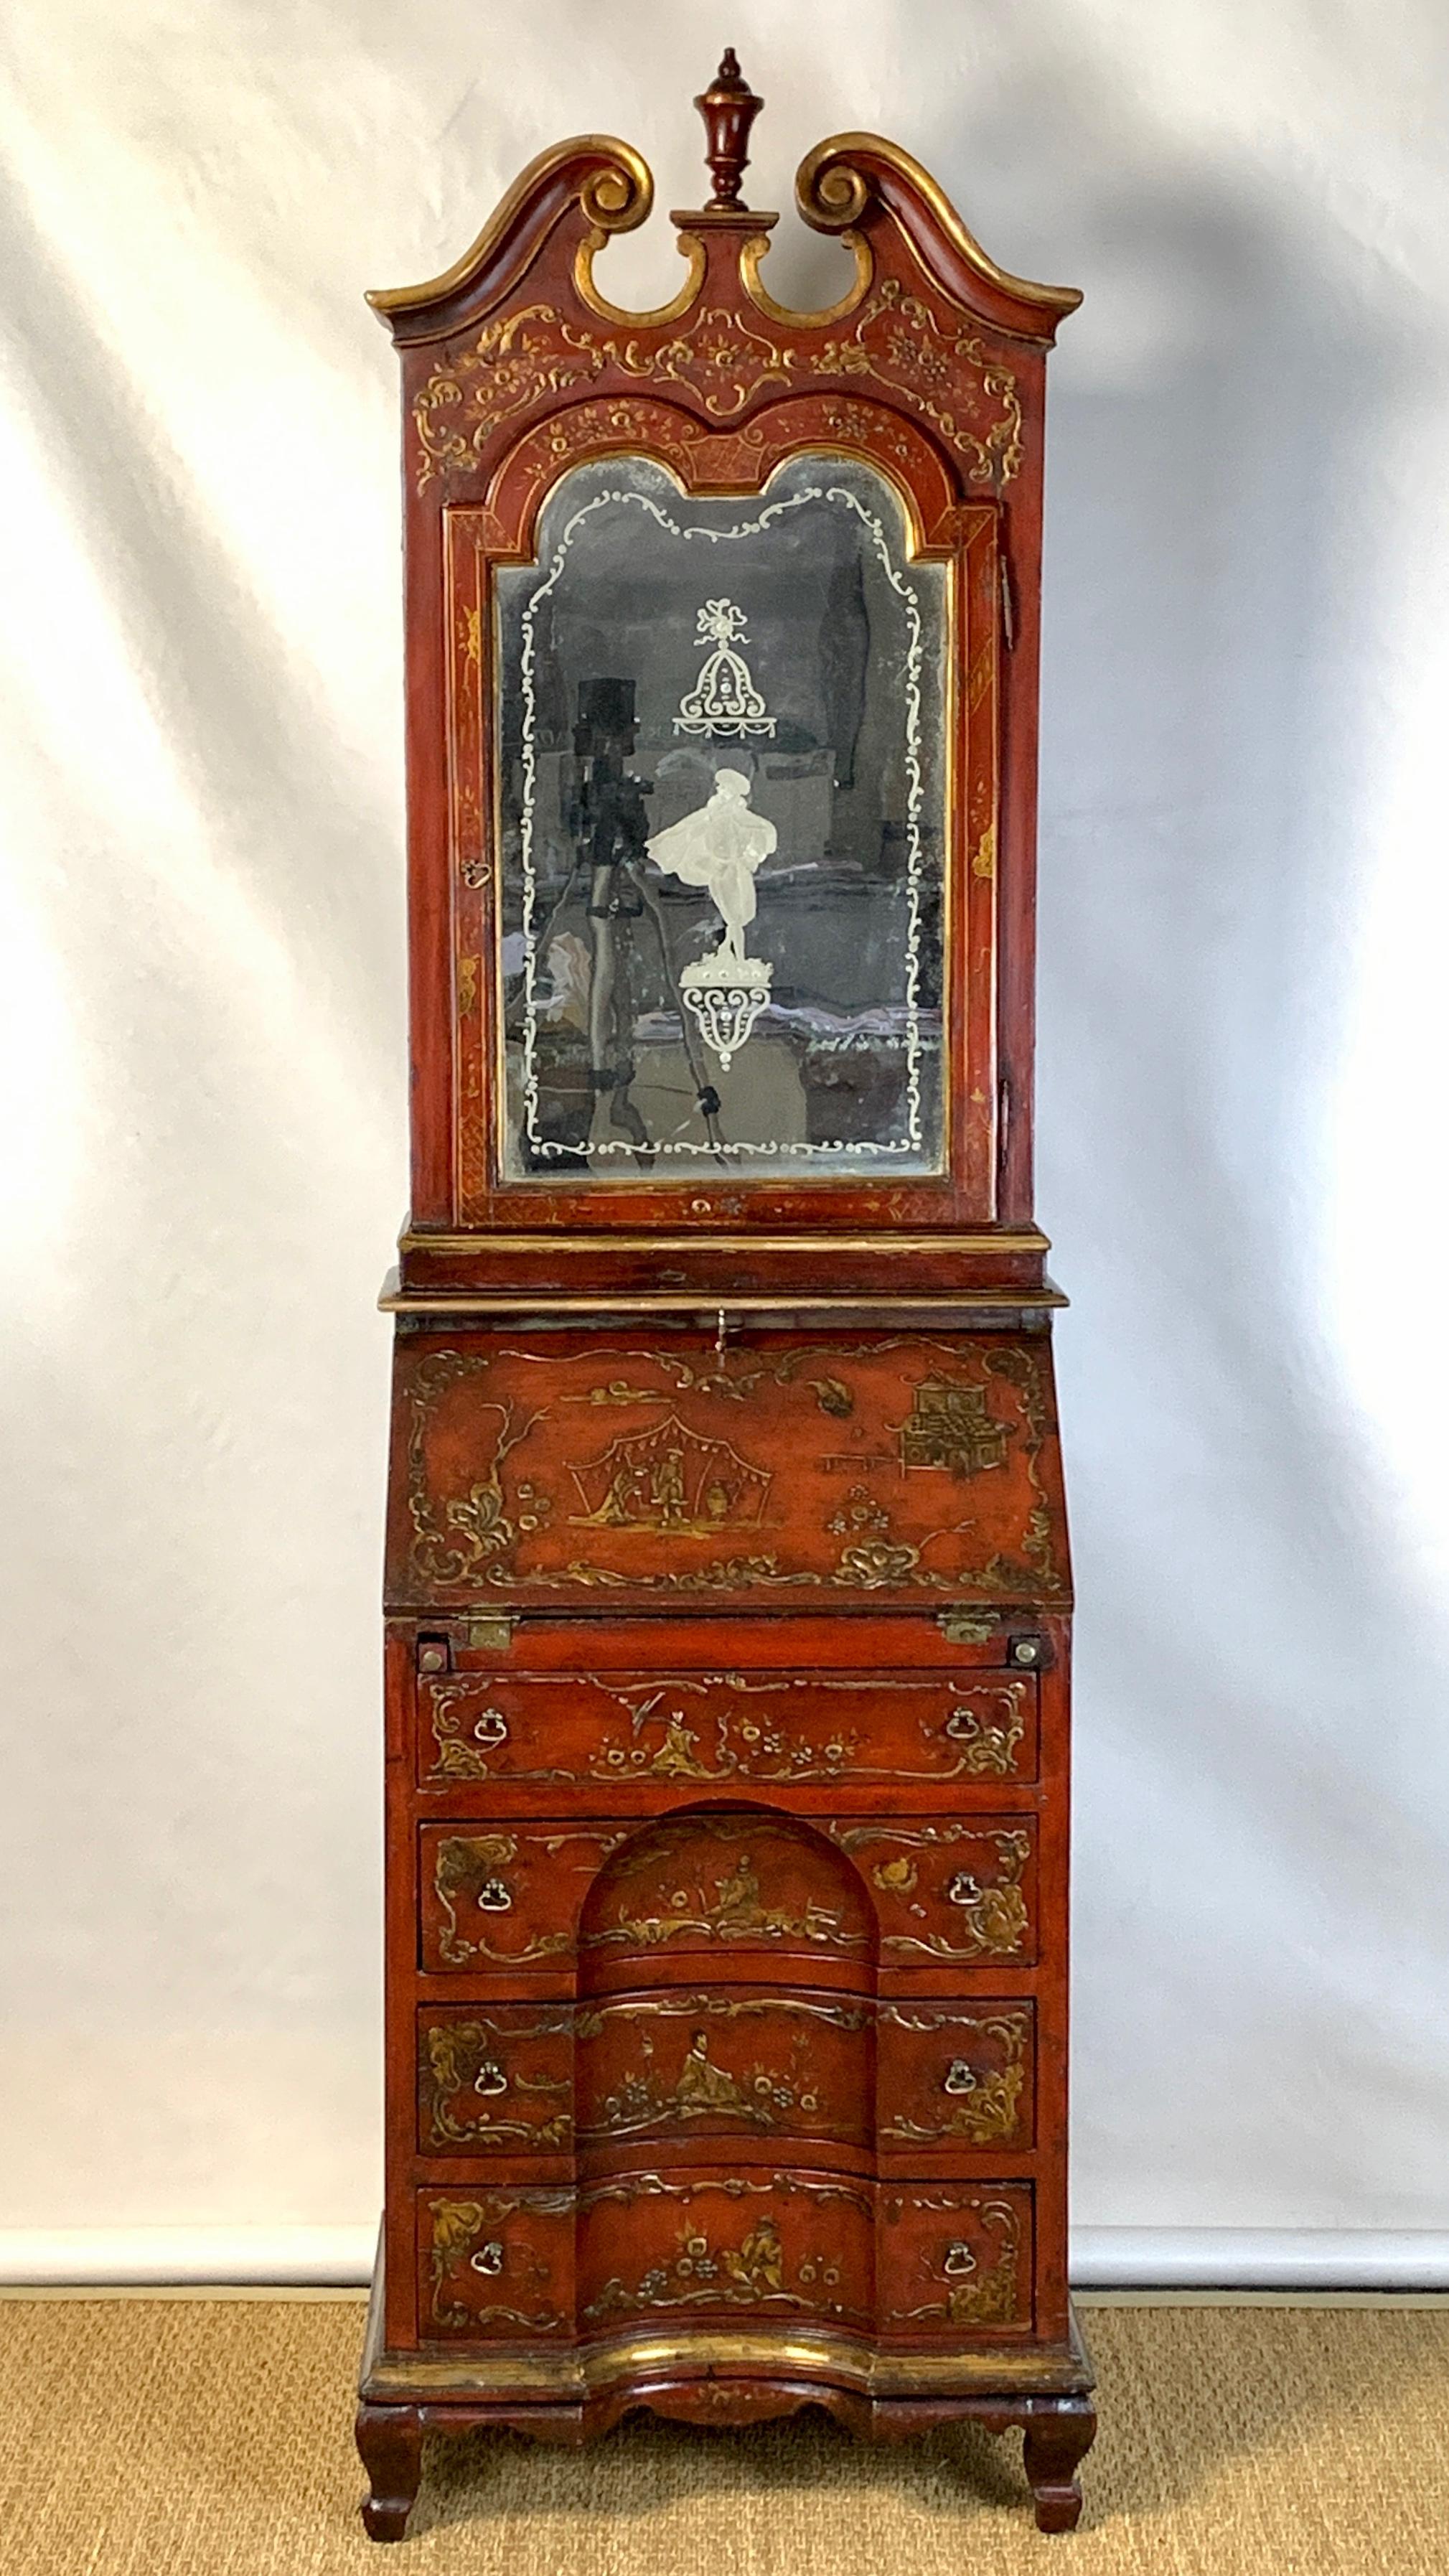 A small and elegant mid-19th century Italian scarlet chinoiserie decorated secretary desk of unusual diminutive size. The upper cabinet is inset with a beautifully carved Venetian mirror revealing elaborately decorated mustard yellow interior above